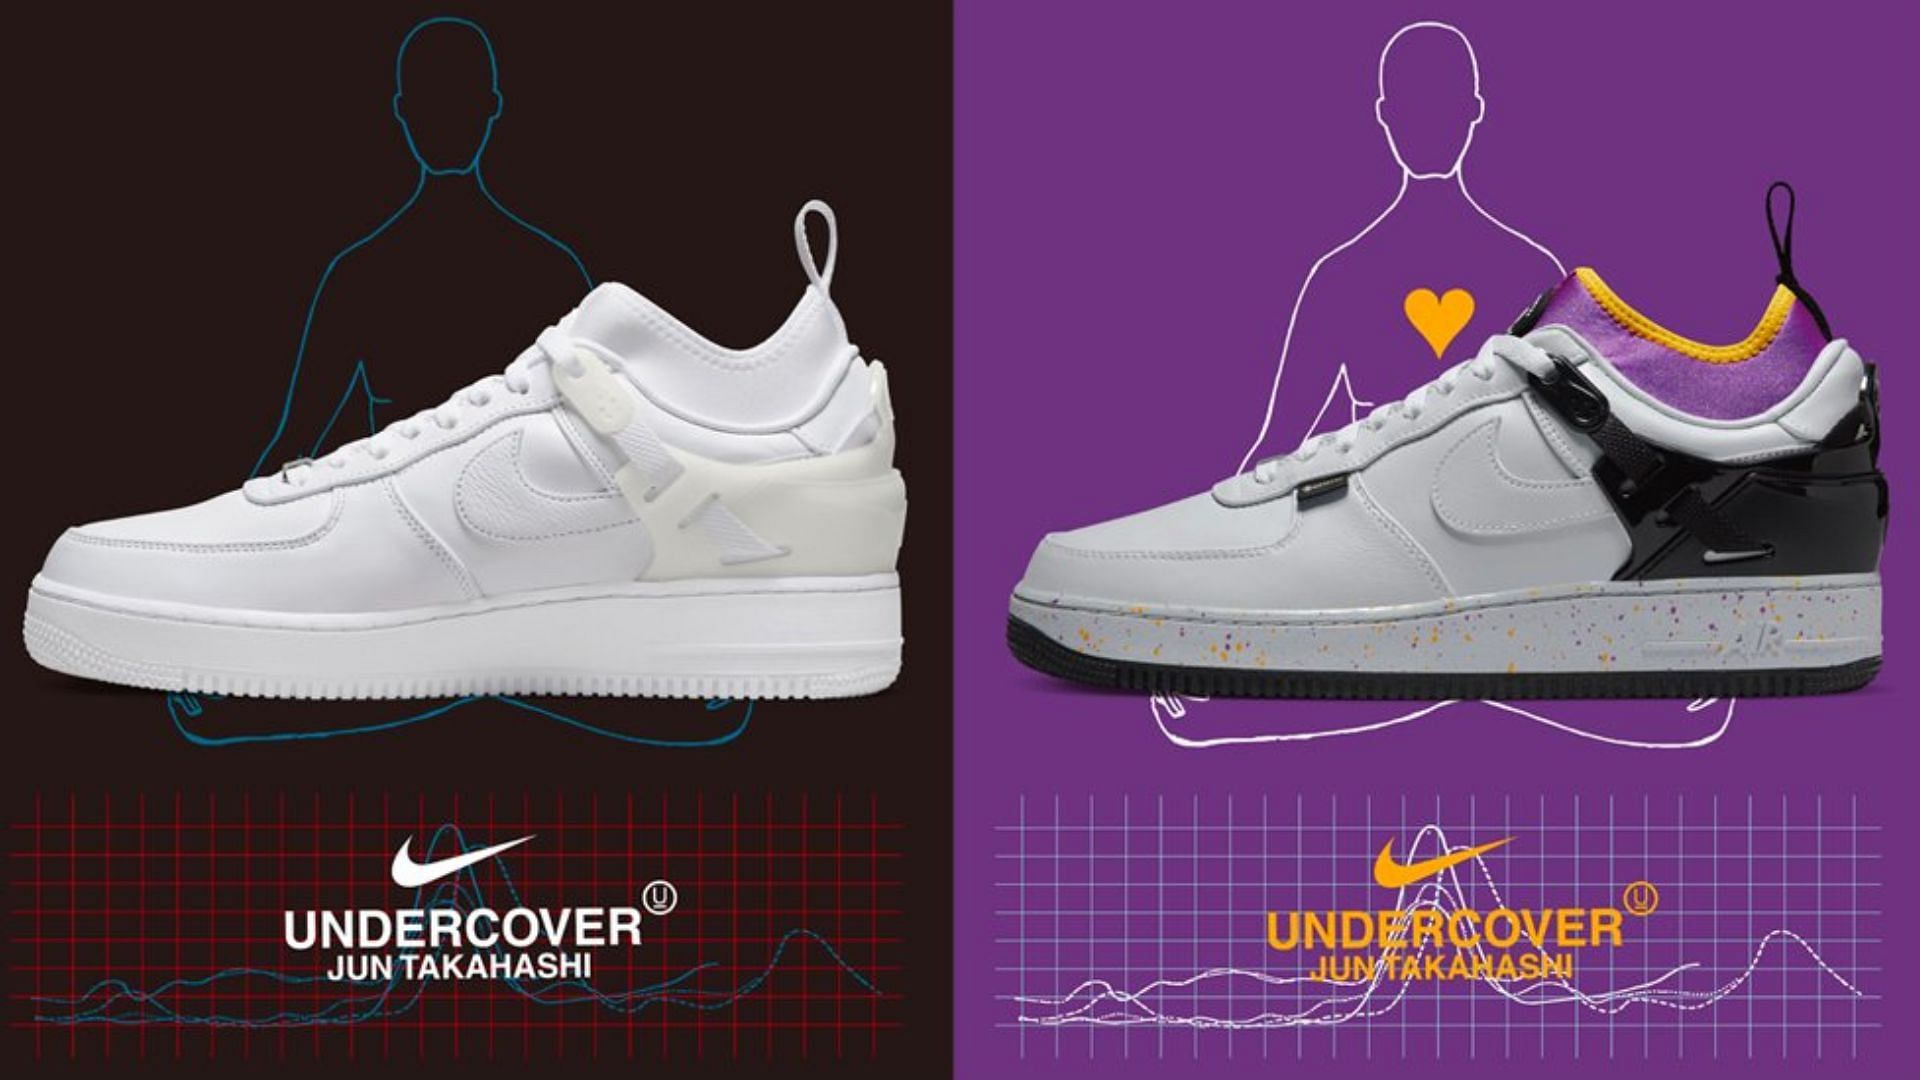 Where to buy UNDERCOVER x Nike Air Force 1 Low footwear pack? Price